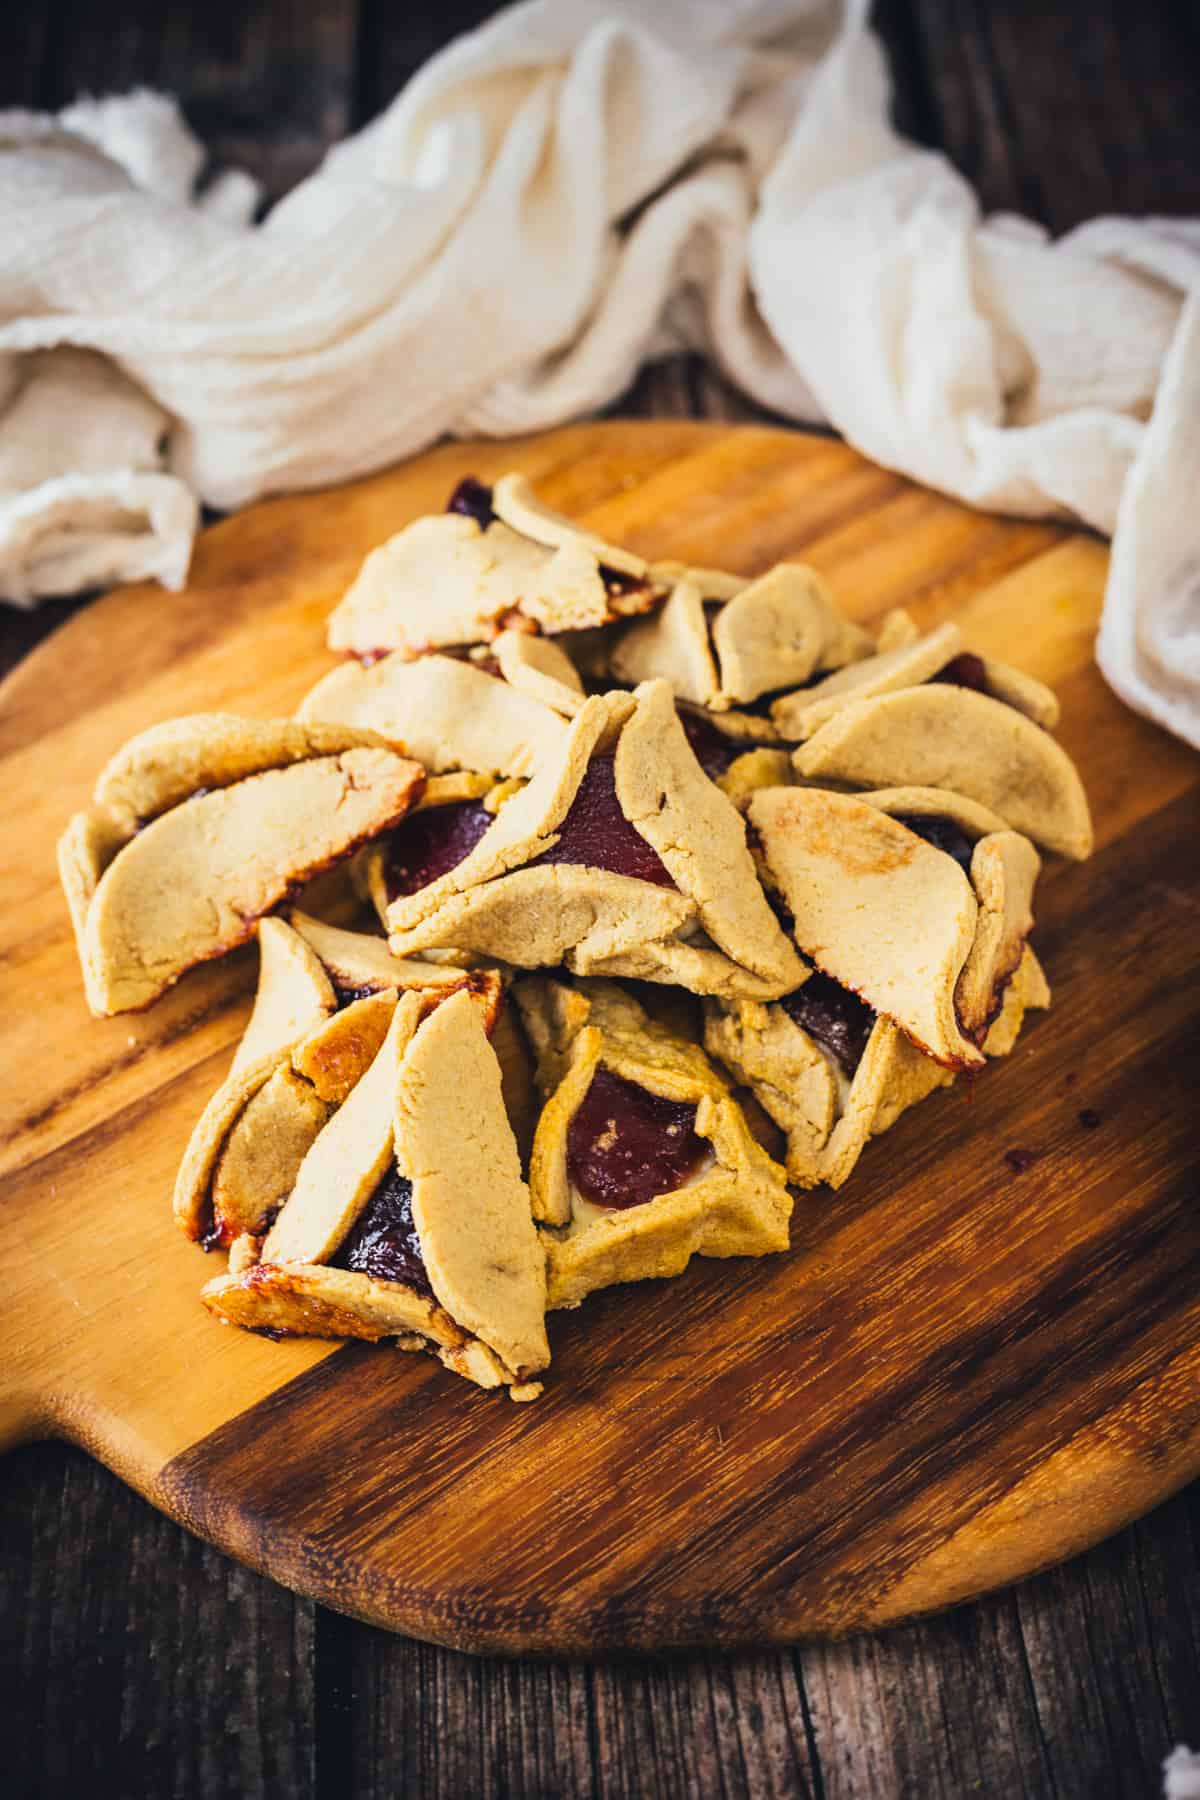 Slices of a fruity Guava Cheese Hamantaschen with a golden crust served on a wooden cutting board, with a white cloth in the background.